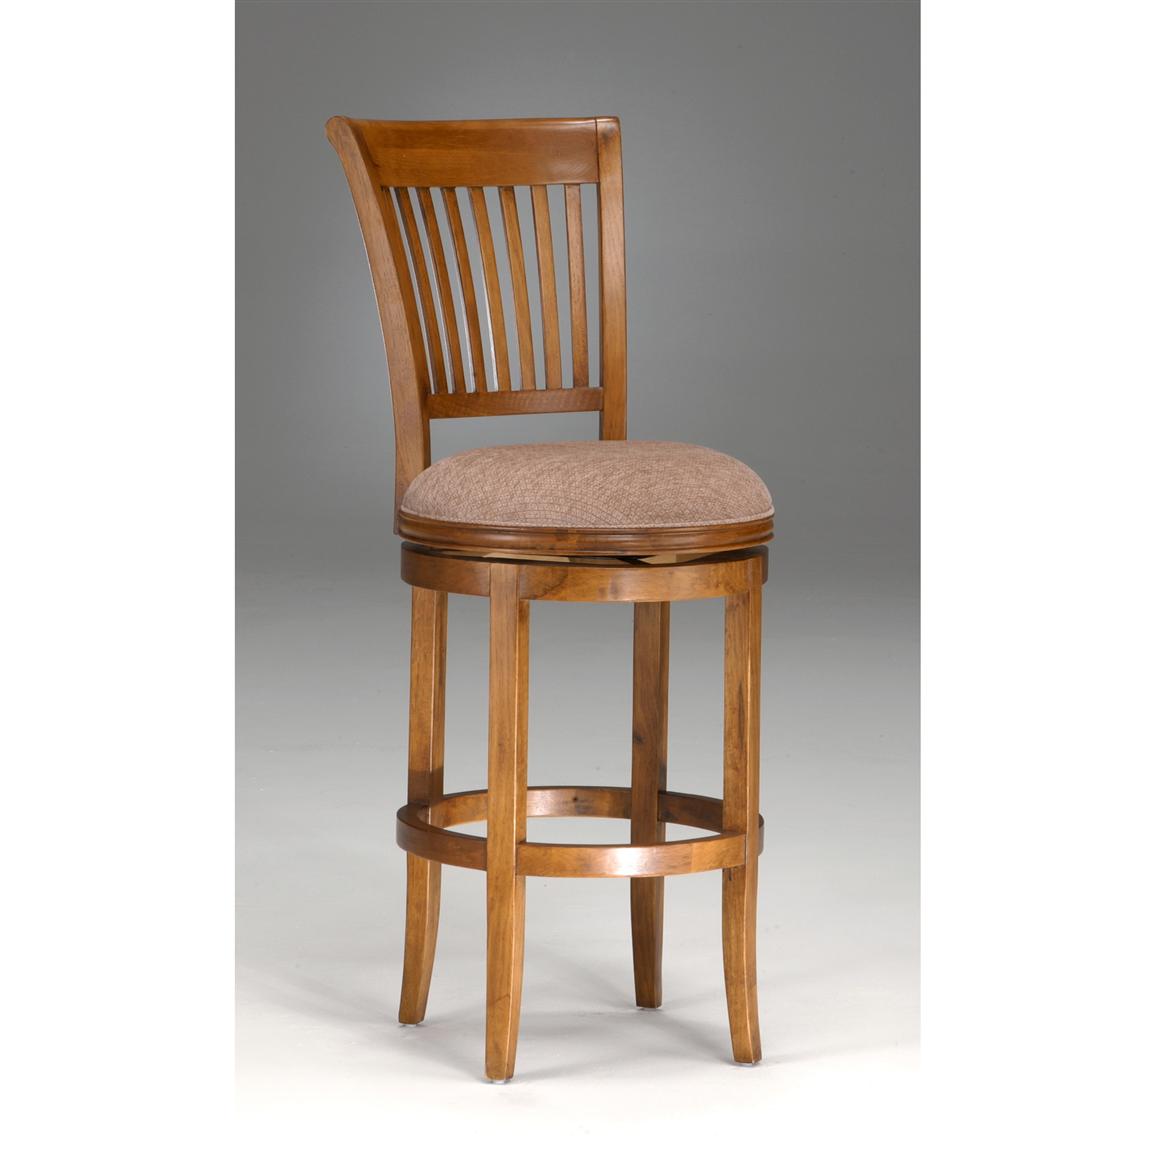 Hillsdale Oak View Swivel Bar Stool - 118160, Kitchen & Dining at Sportsman's Guide1155 x 1155